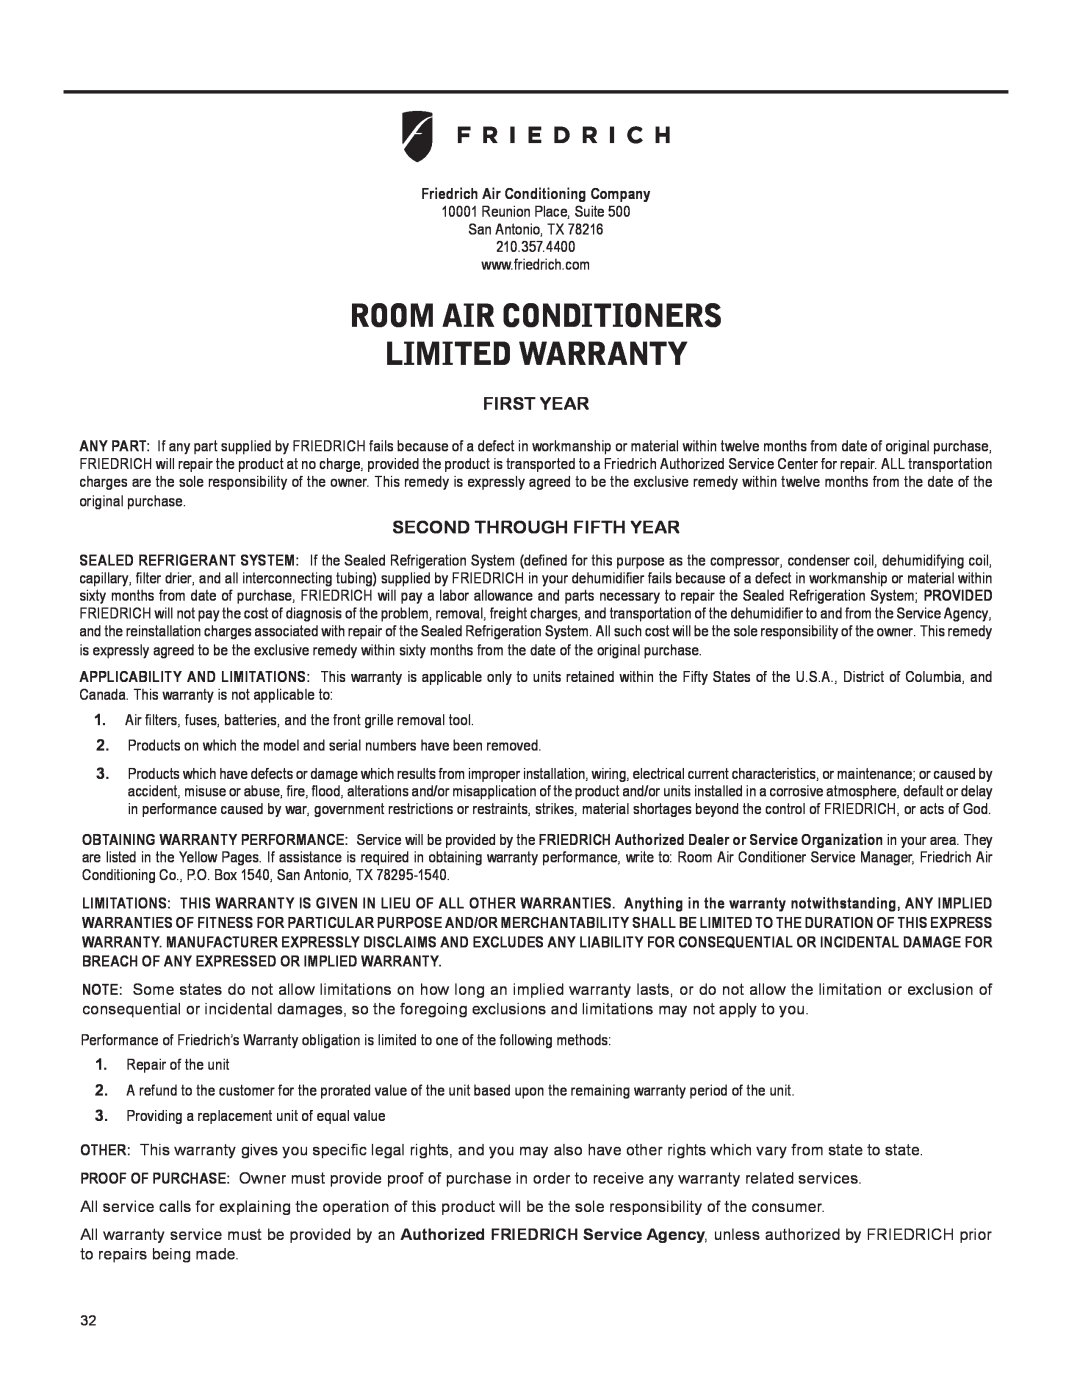 Friedrich 920-087-09 operation manual Room Air Conditioners Limited Warranty, First Year, Second Through Fifth Year 